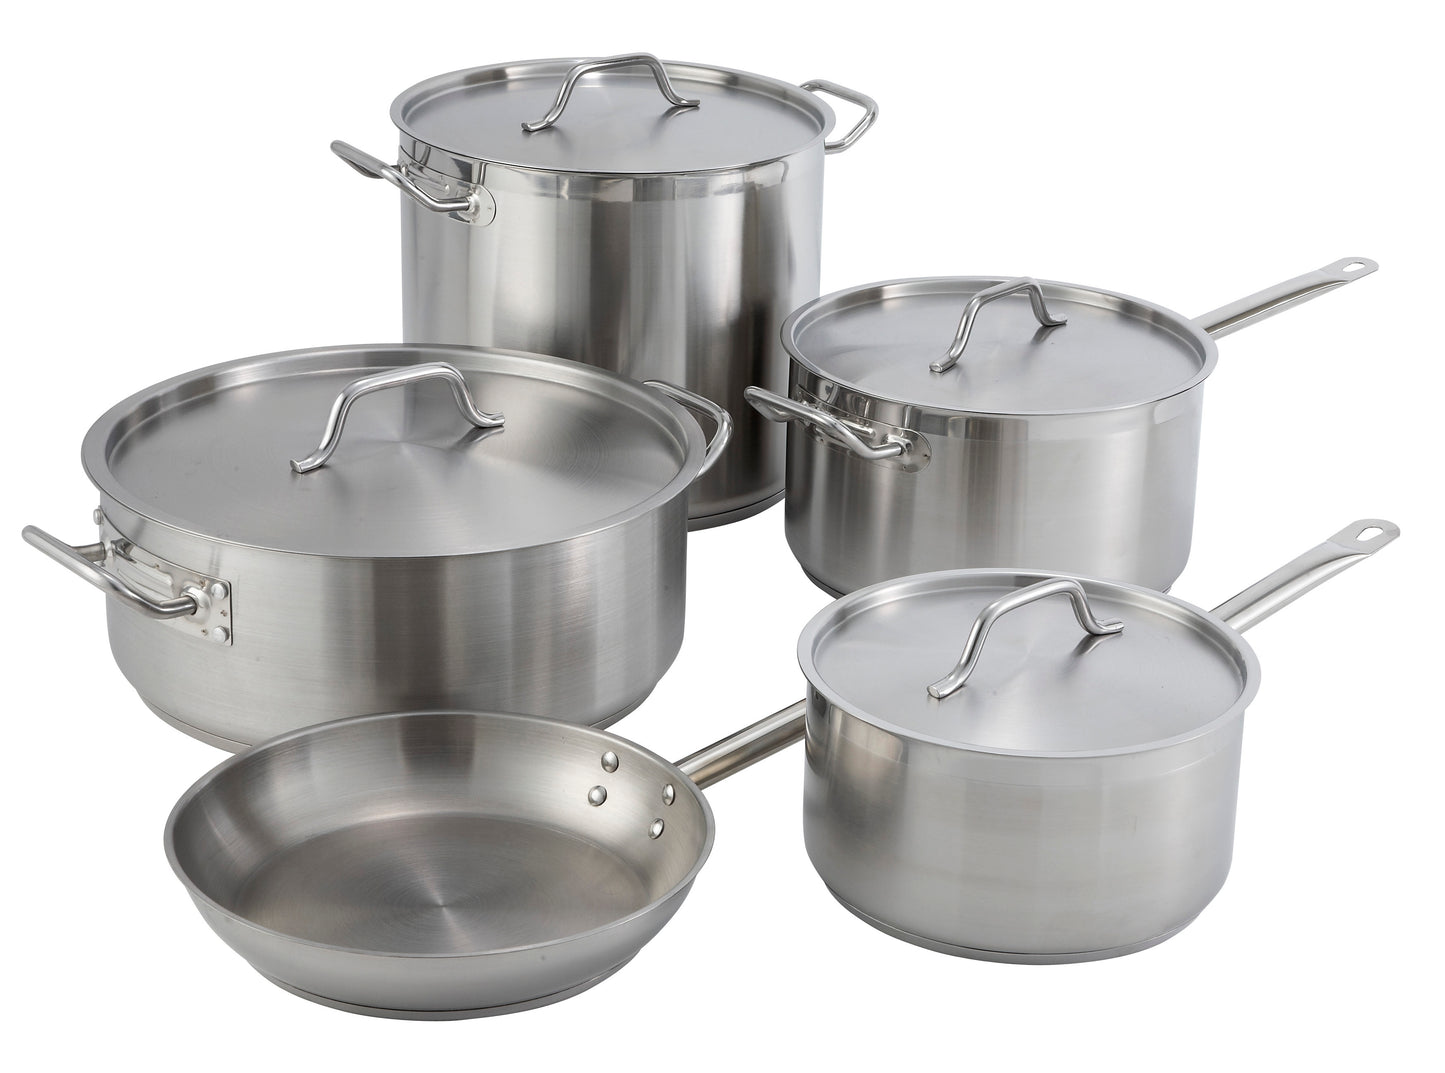 SSSP-6 - Stainless Steel Sauce Pan with Cover - 6 Quart